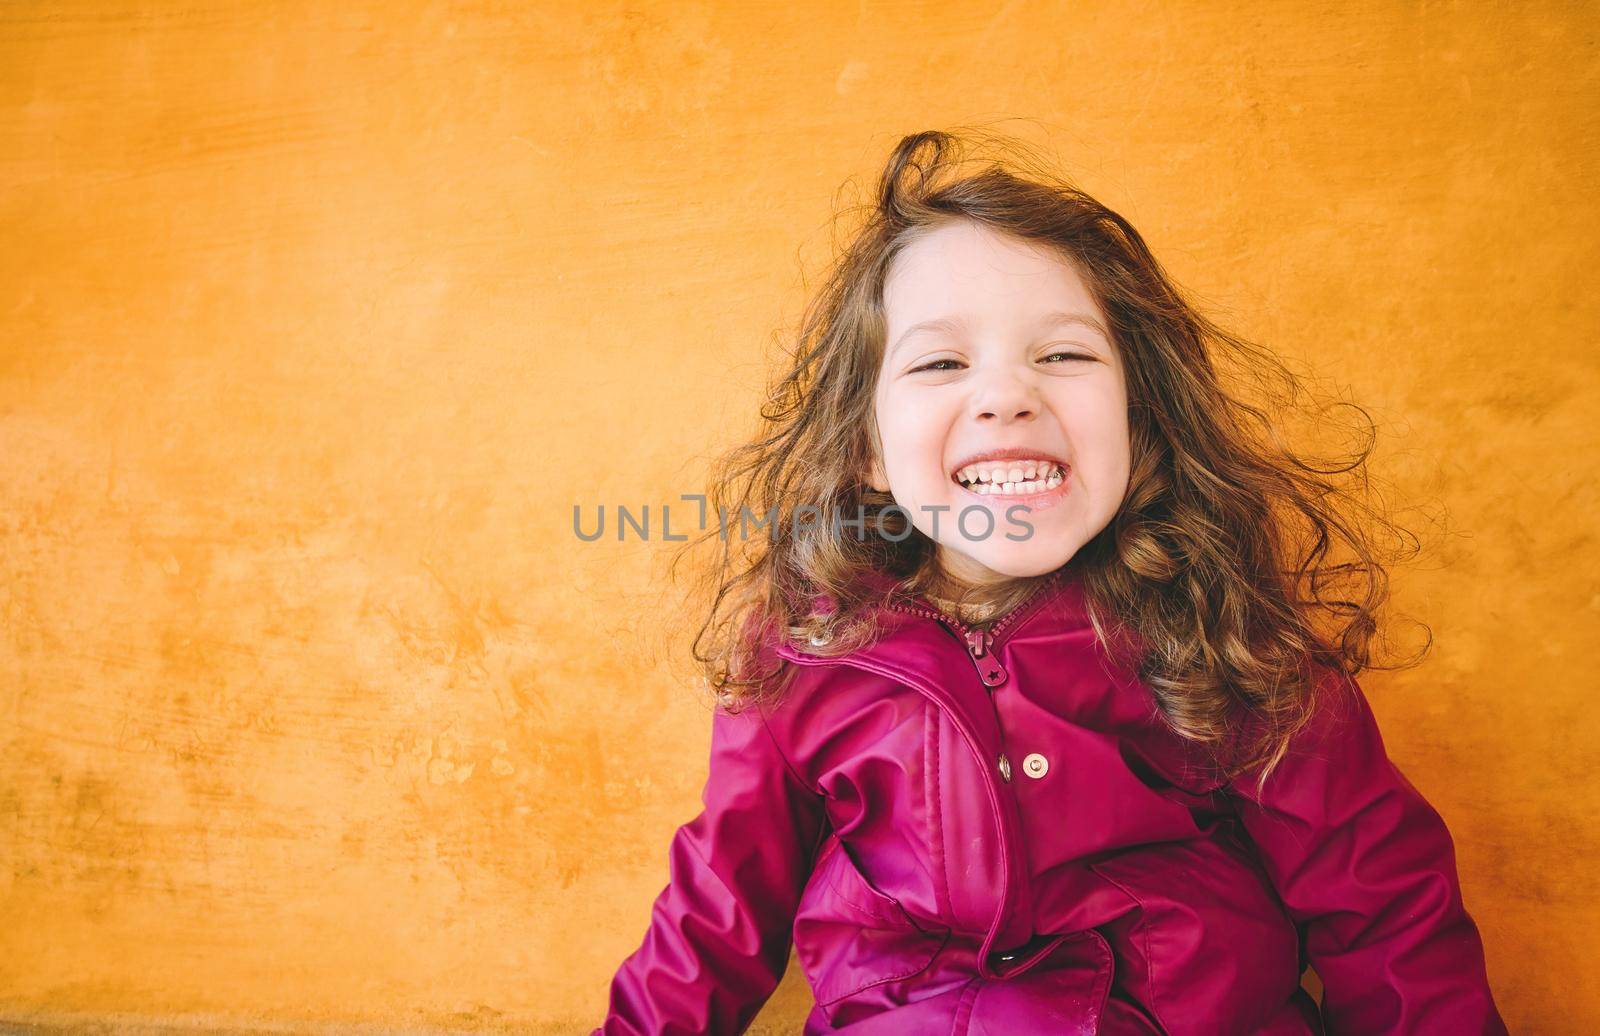 Young girl with a cheeky smile looking directly at the camera against a bright yellow wall background by tennesseewitney